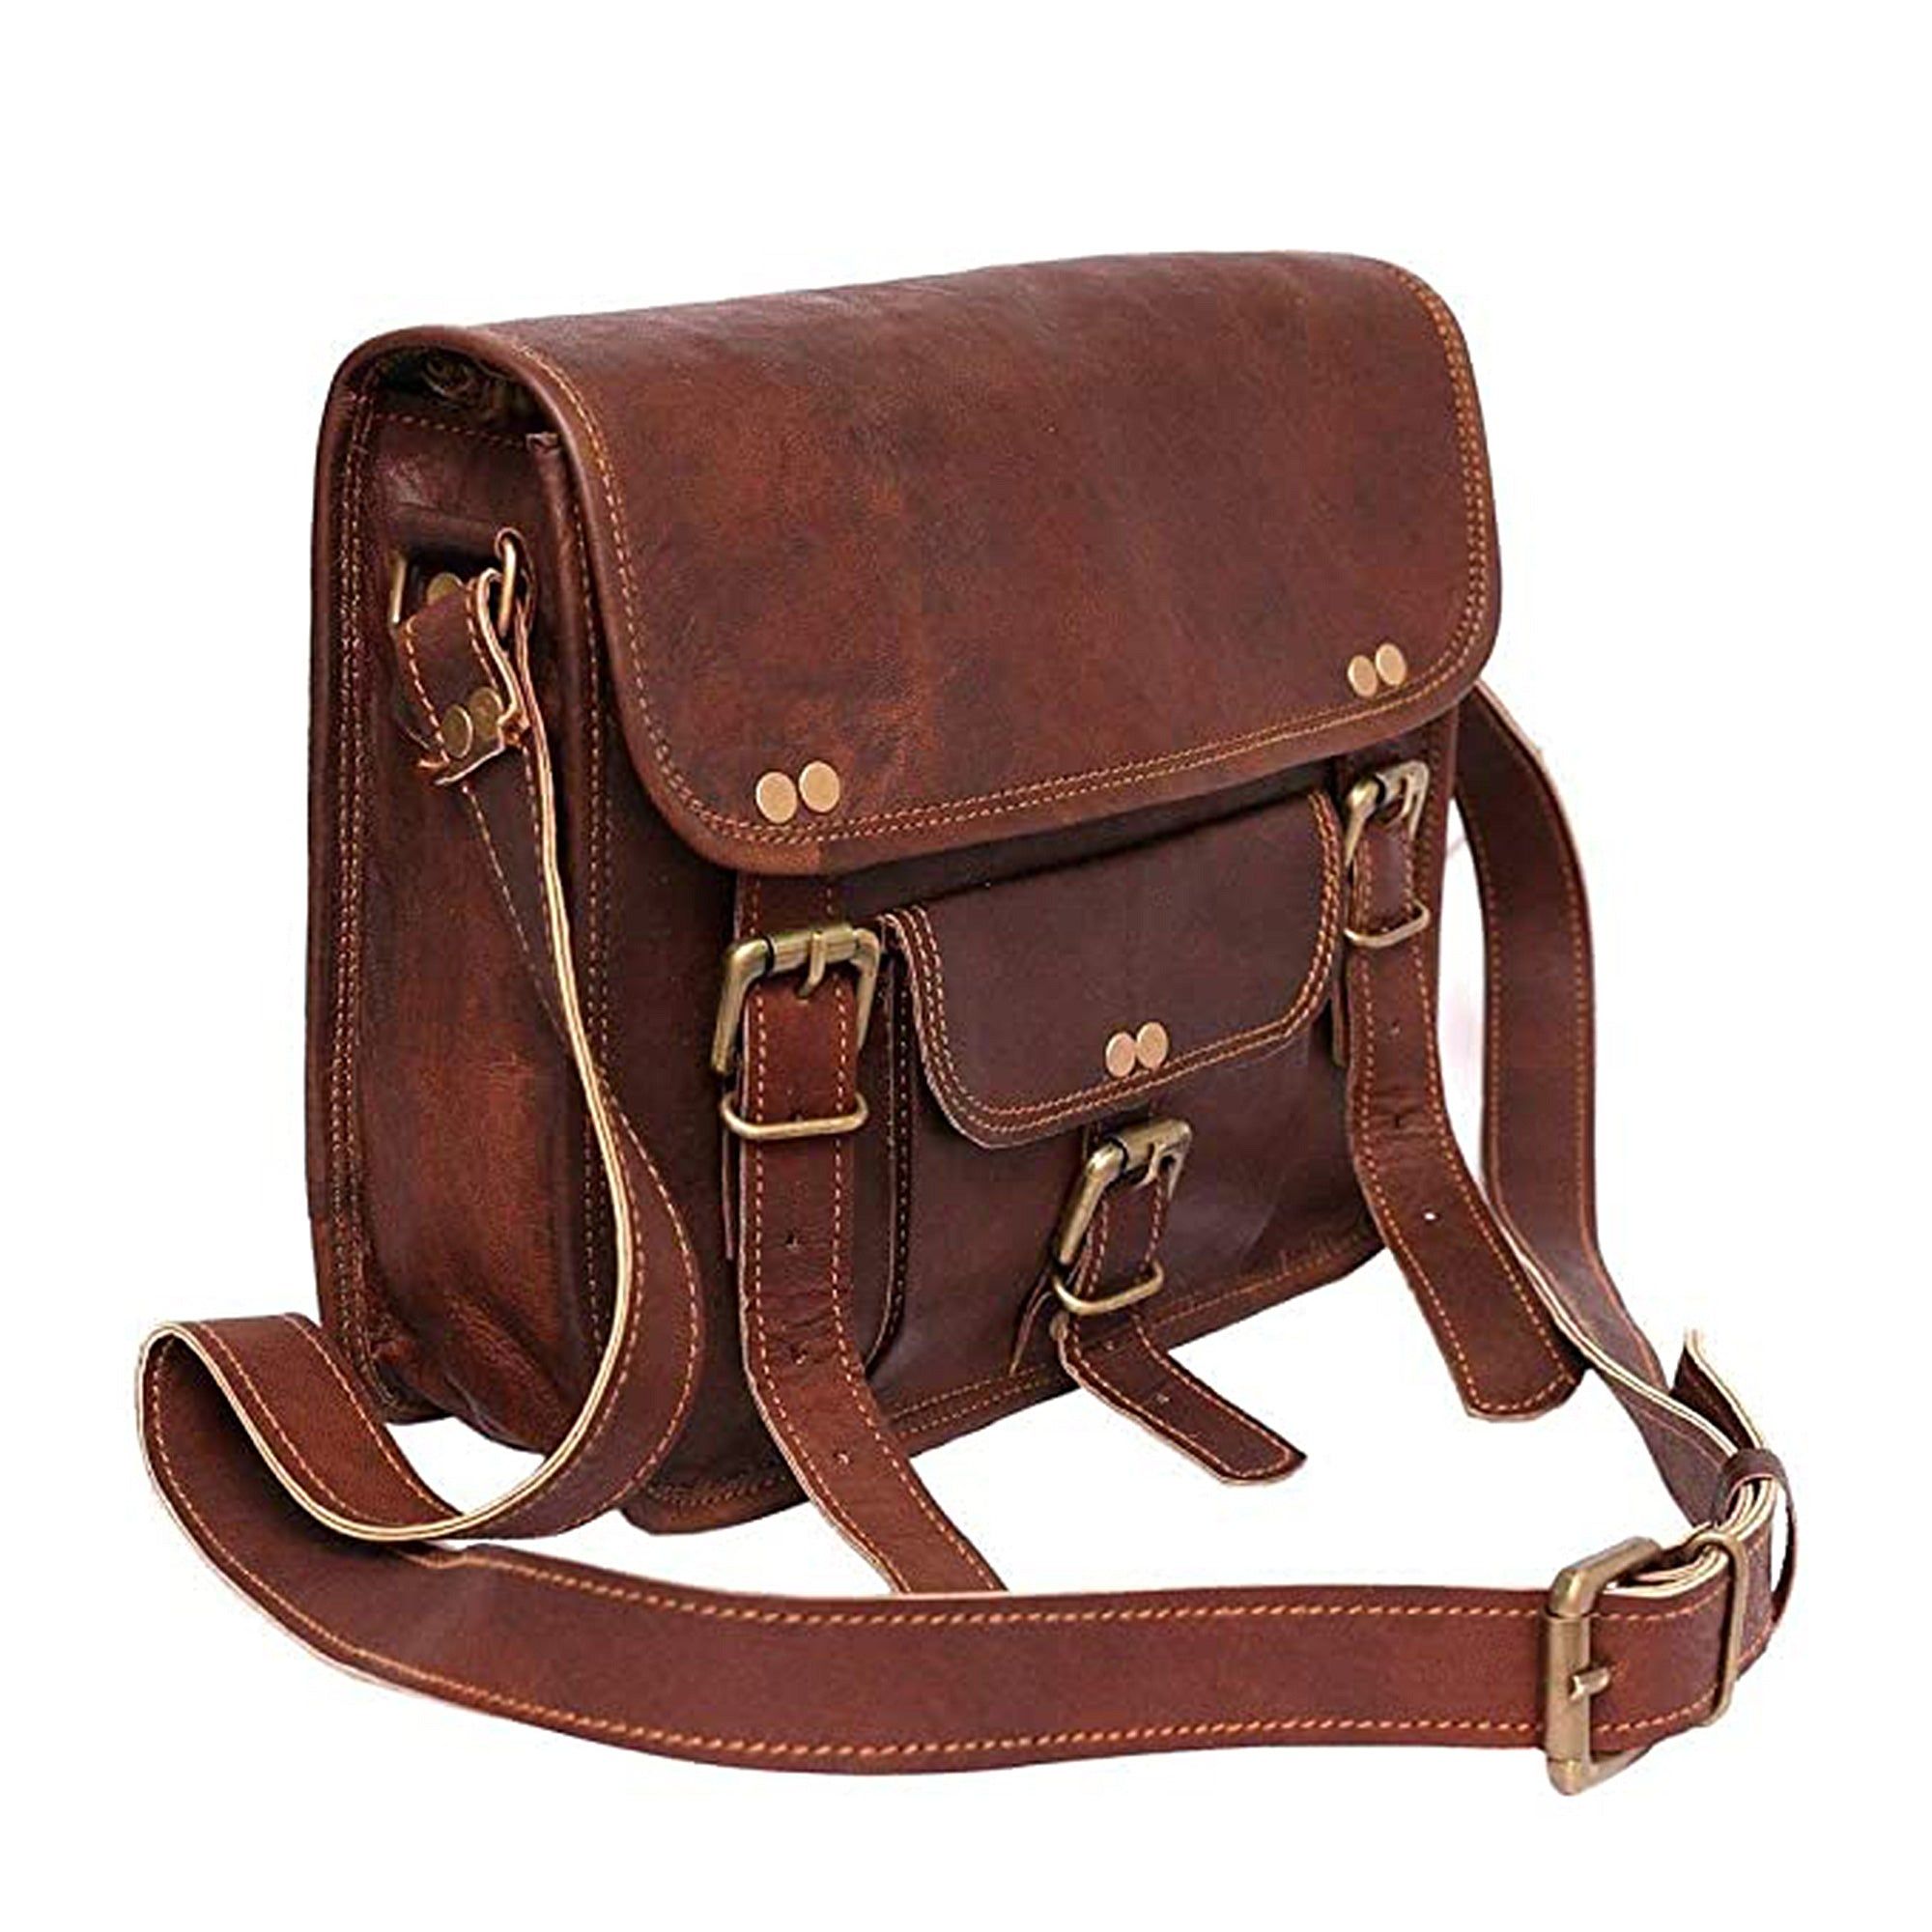 Carry in Style: Exploring Satchel Bags